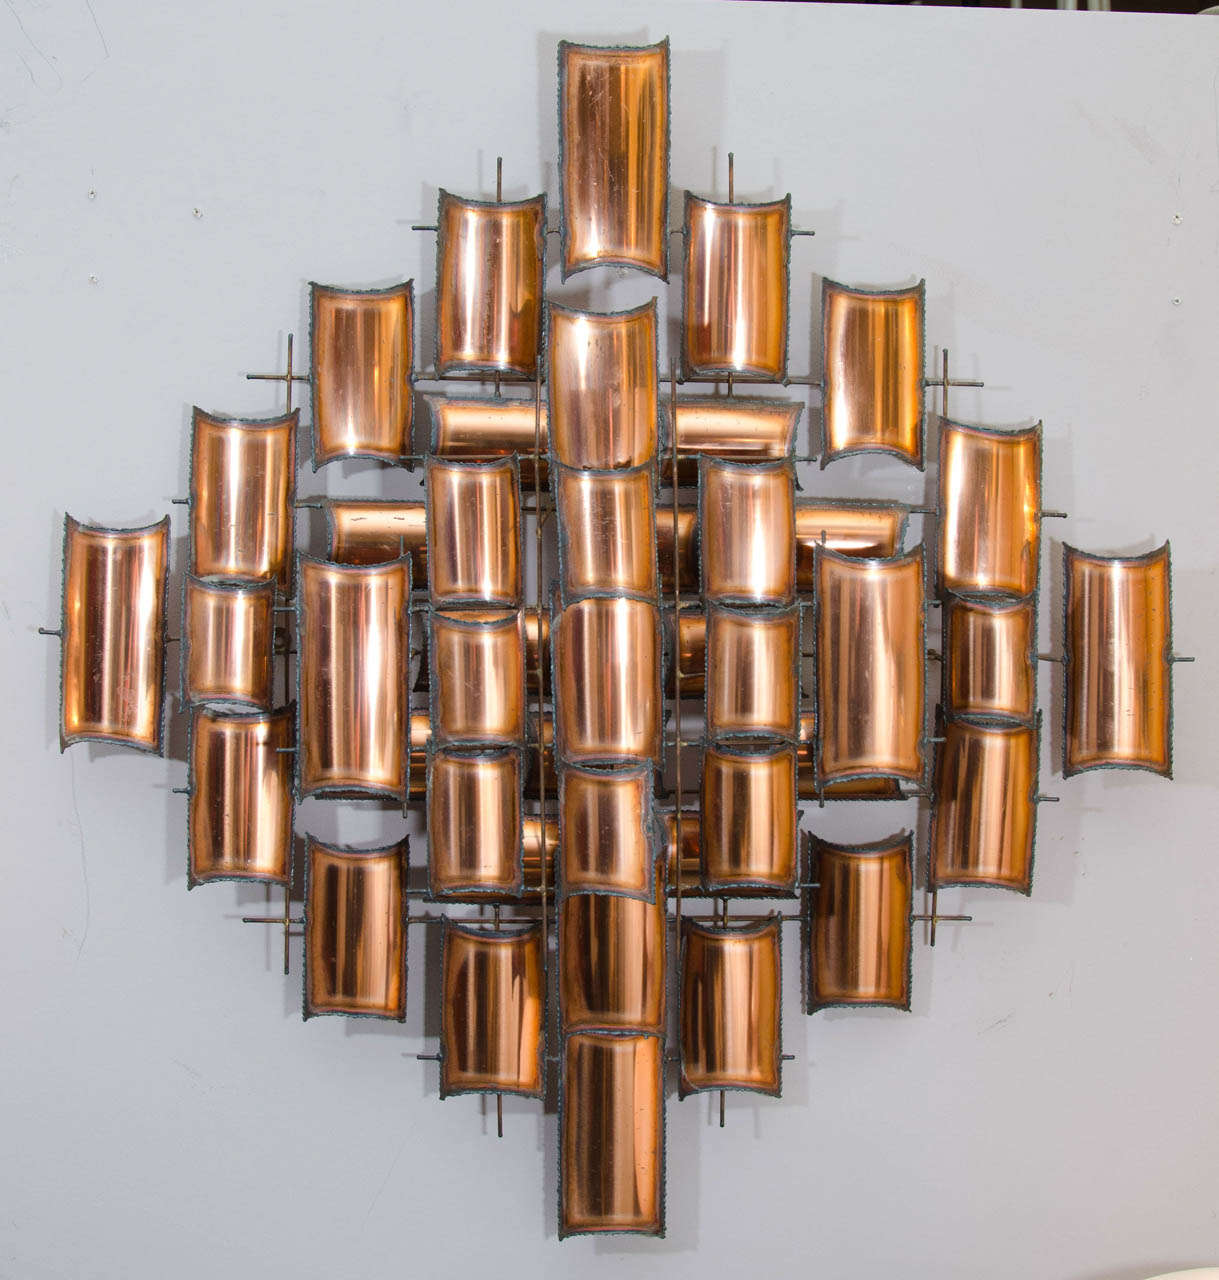 Striking wall sculpture with torch cut copper elements arranged in a grid. Very nicely done. May be mounted vertically as shown or horizontally or diagonally. Please contact for location. 